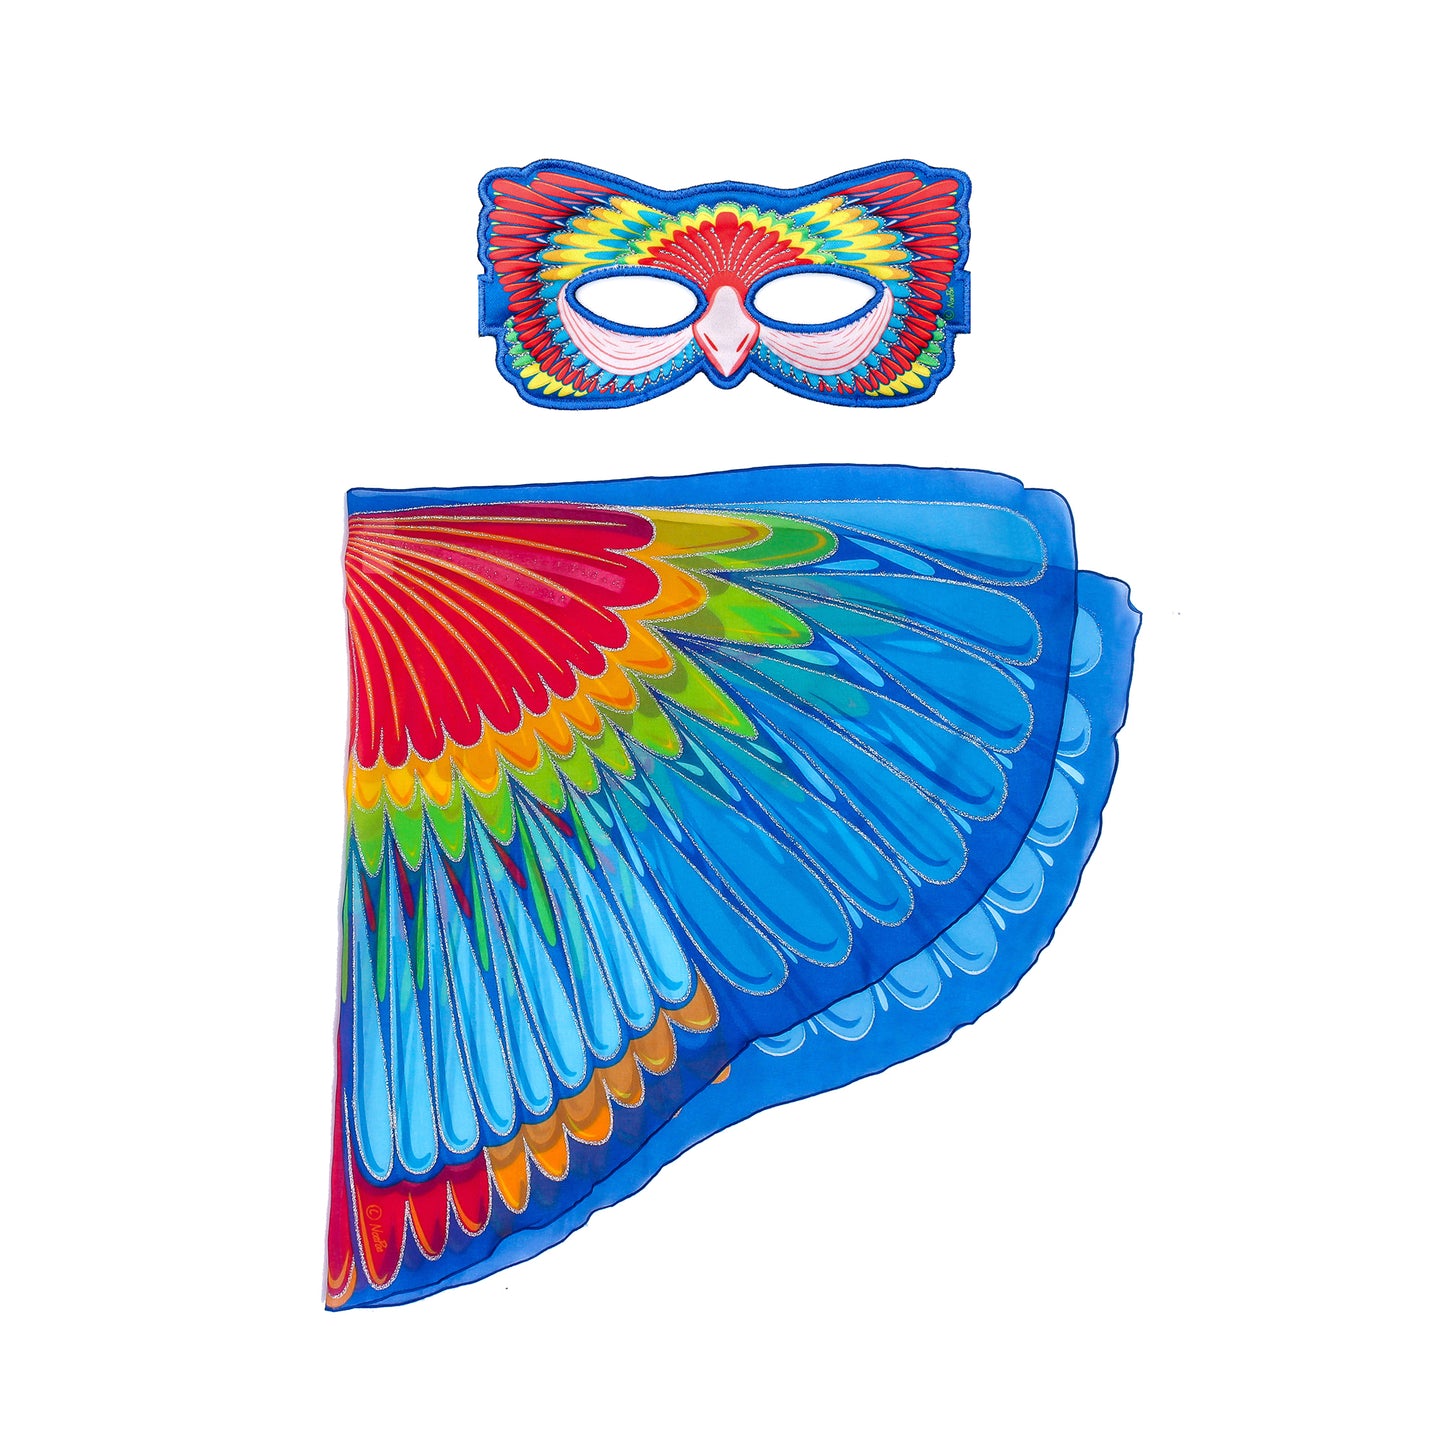 SCARLET MACAW PARROT WINGS + MASK in eco-friendly cotton gift bag